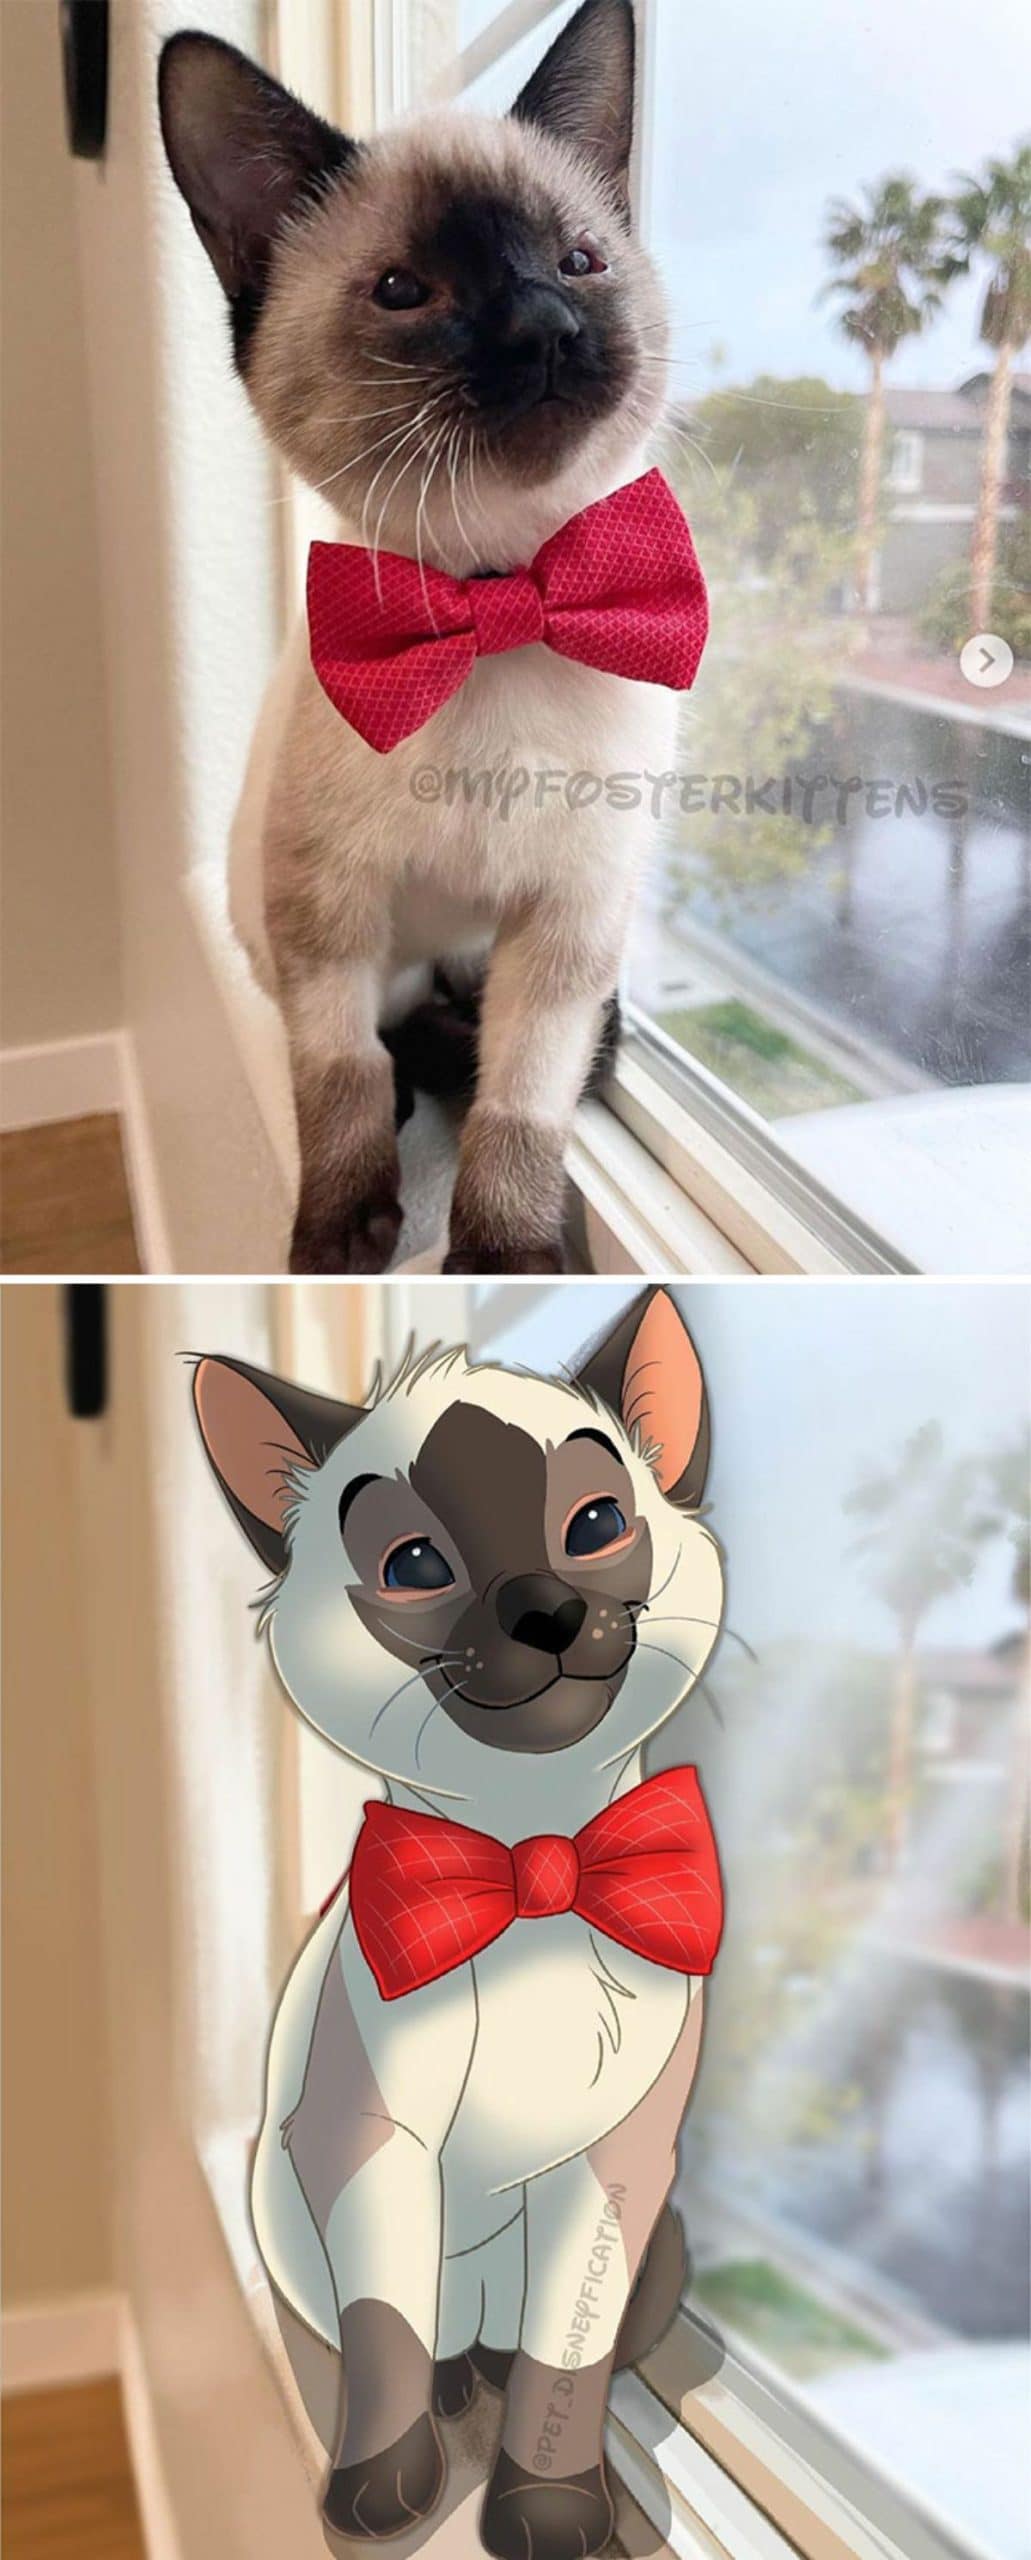 real photo and cartoon image of a brown and black siamese kitten wearing a red bowtie